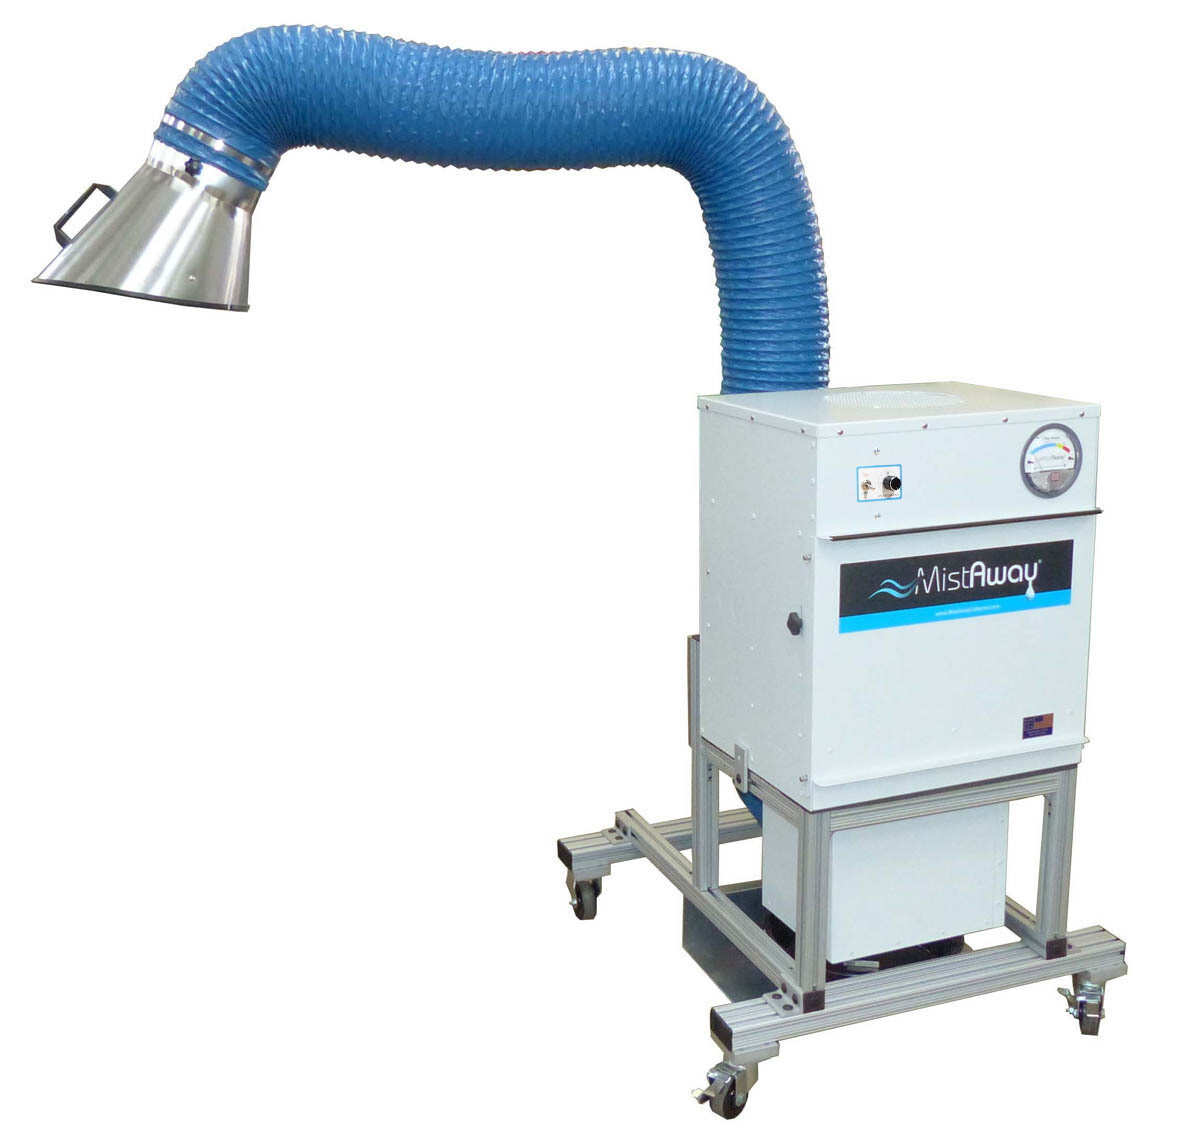 Mobile Mist and Fume Extractor